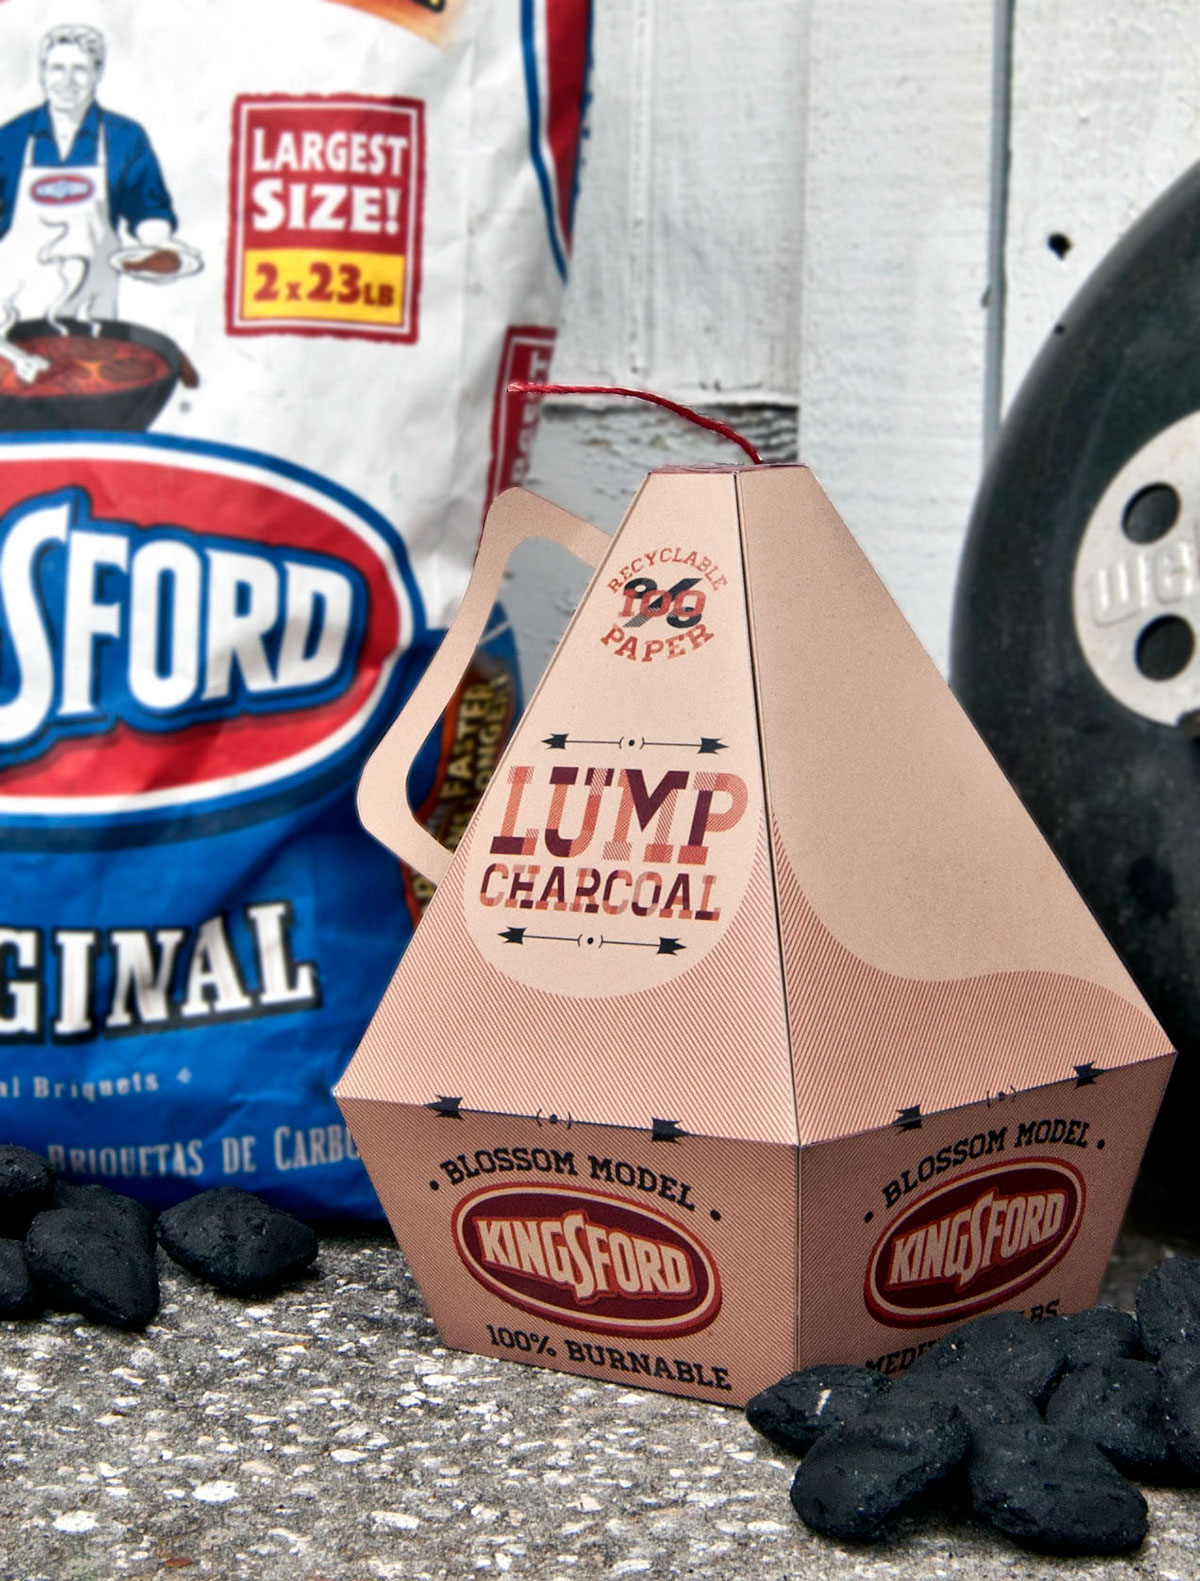 king Kingsford charcoal  Coal  fire  Outdoors Nick kyle  RINGLING  Packaging Pack  48 hours redesign Competition